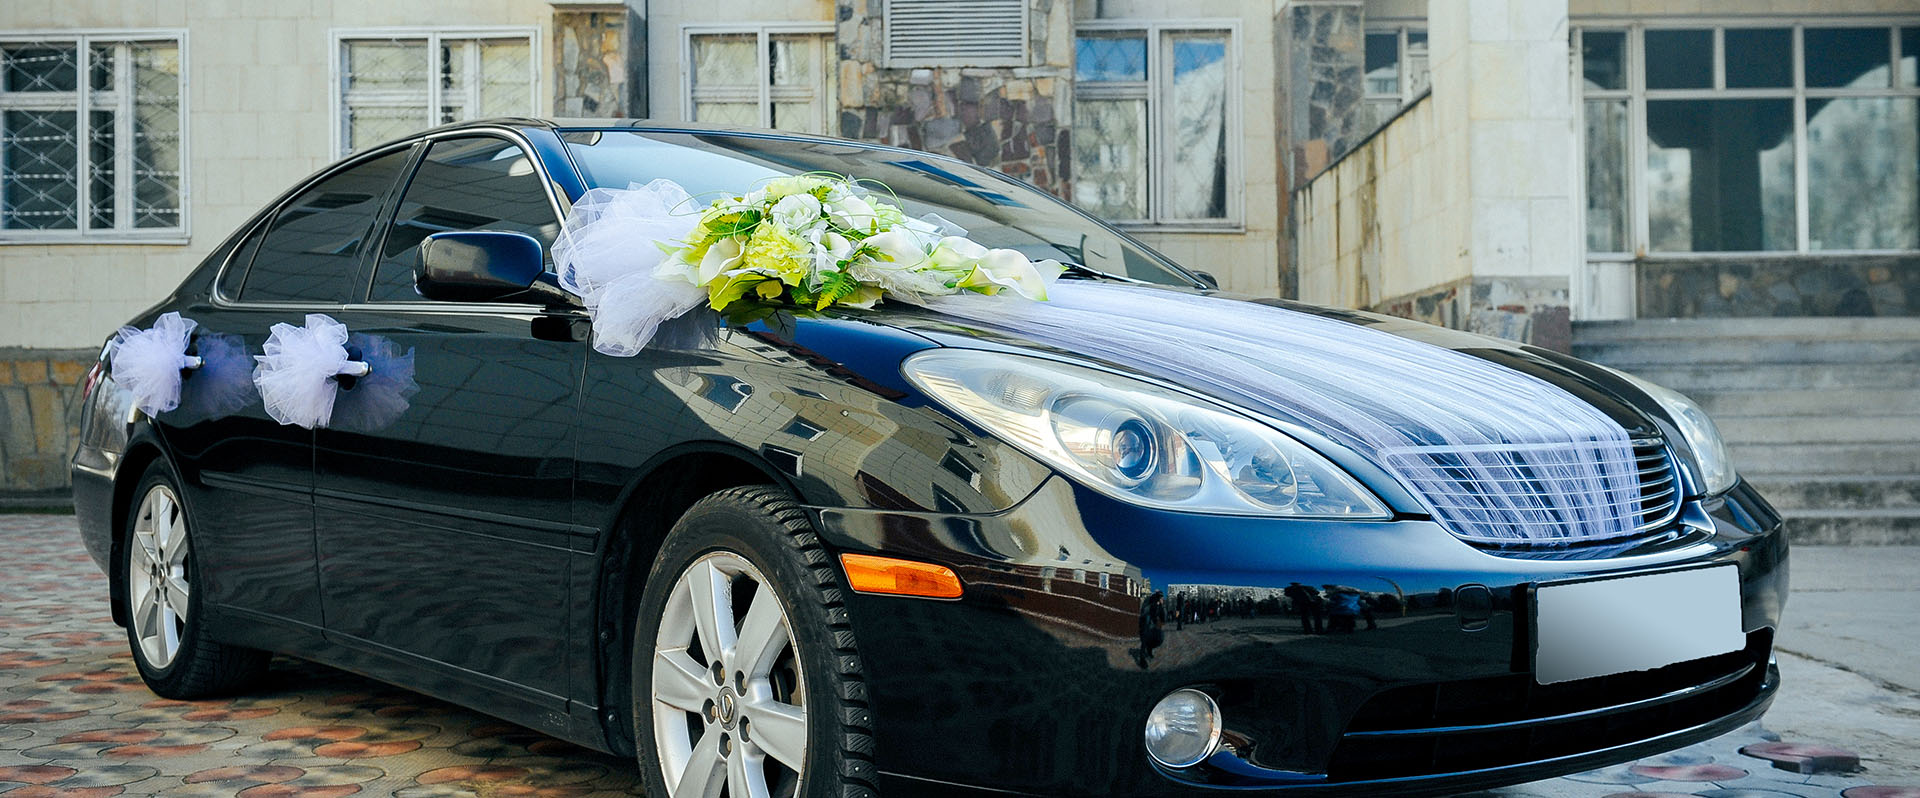 car decorated with wedding flowers and ribbons